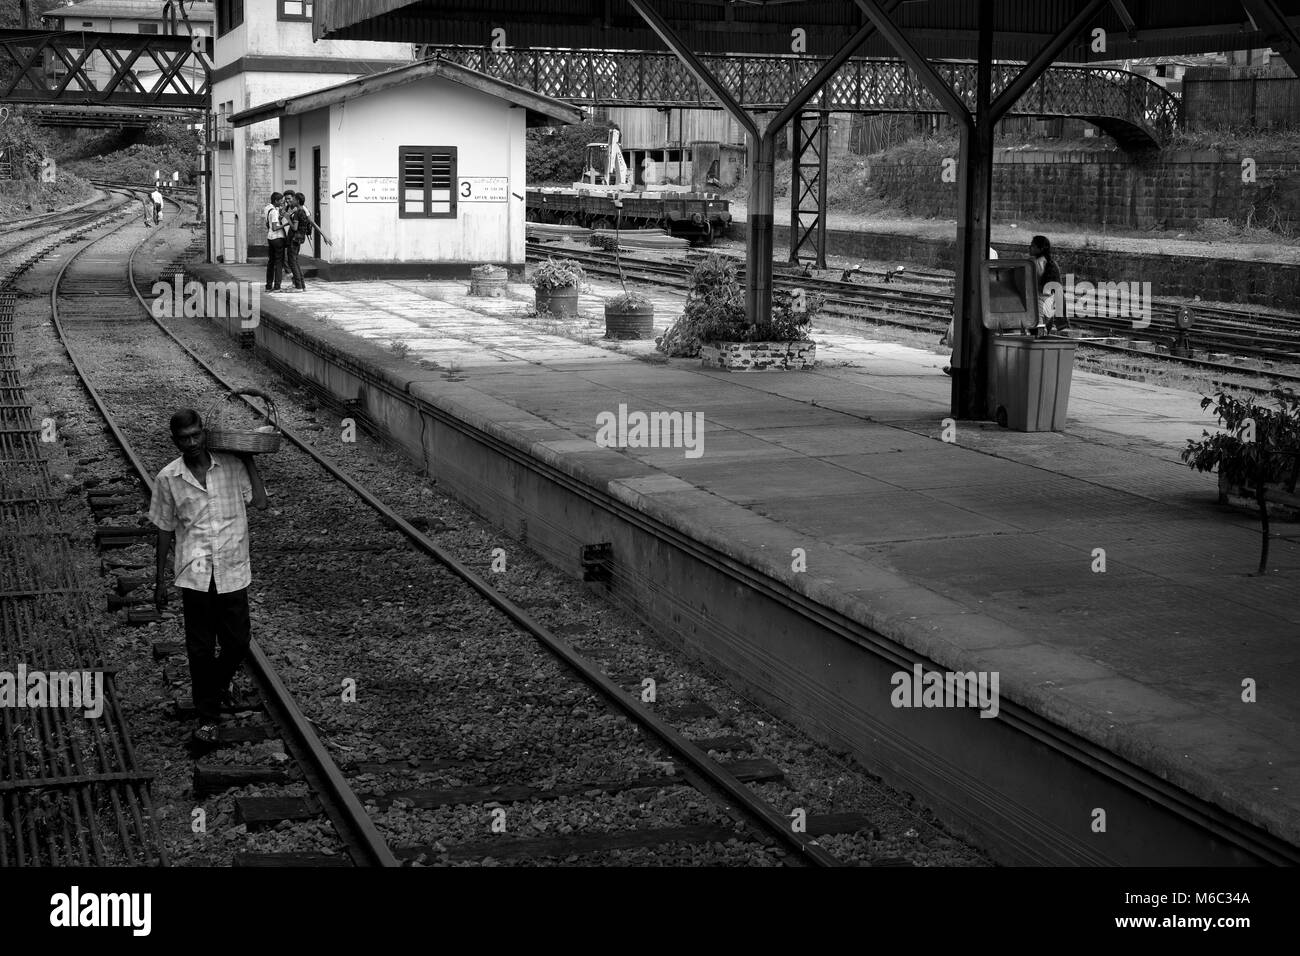 A man selling snacks walks down the railway tracks at Hatton station in the Badulla district of Sri Lanka Stock Photo